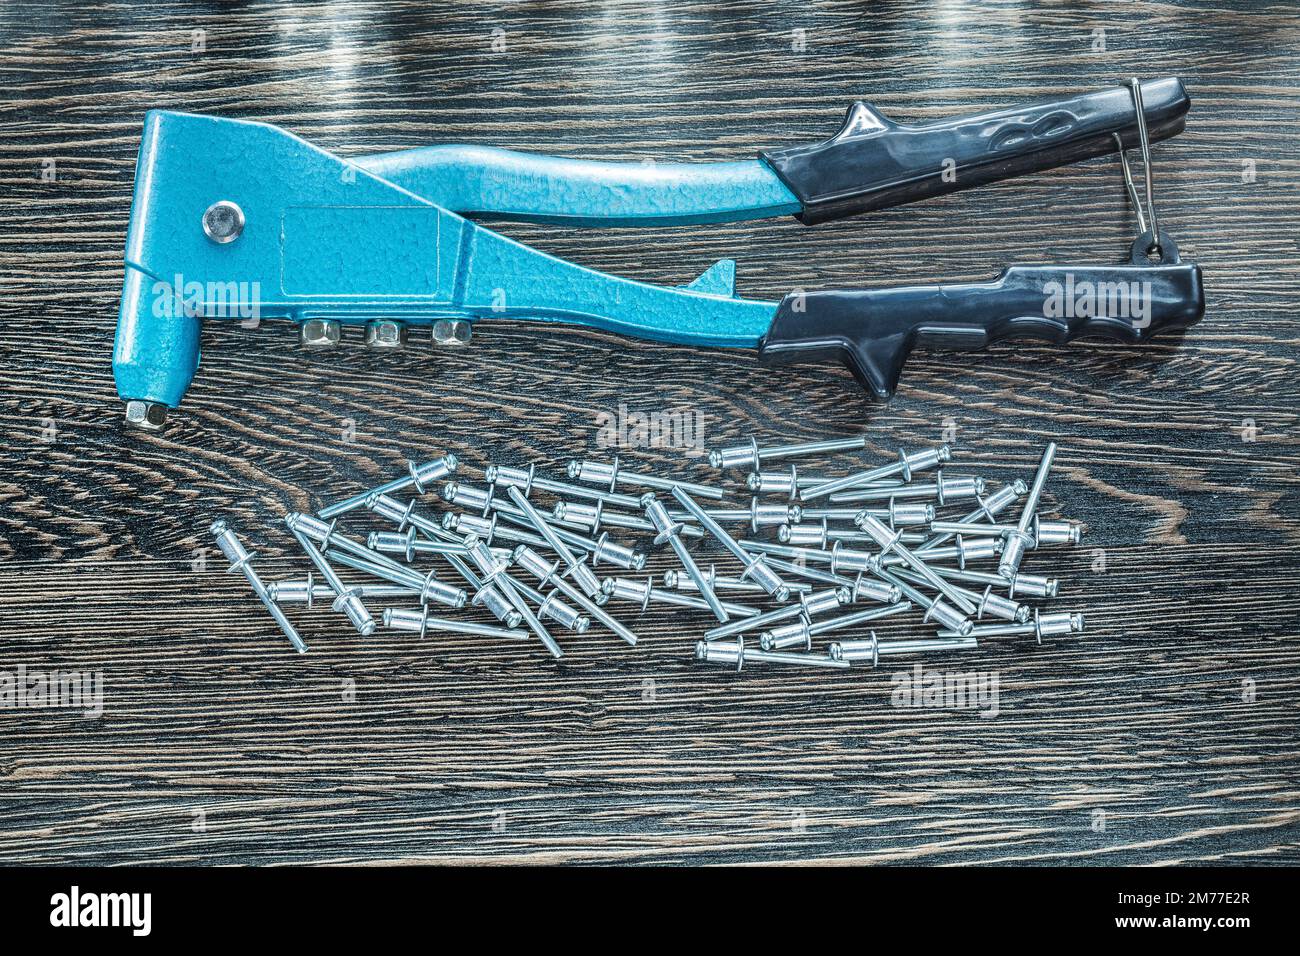 Riveting pliers screws on wooden board. Stock Photo